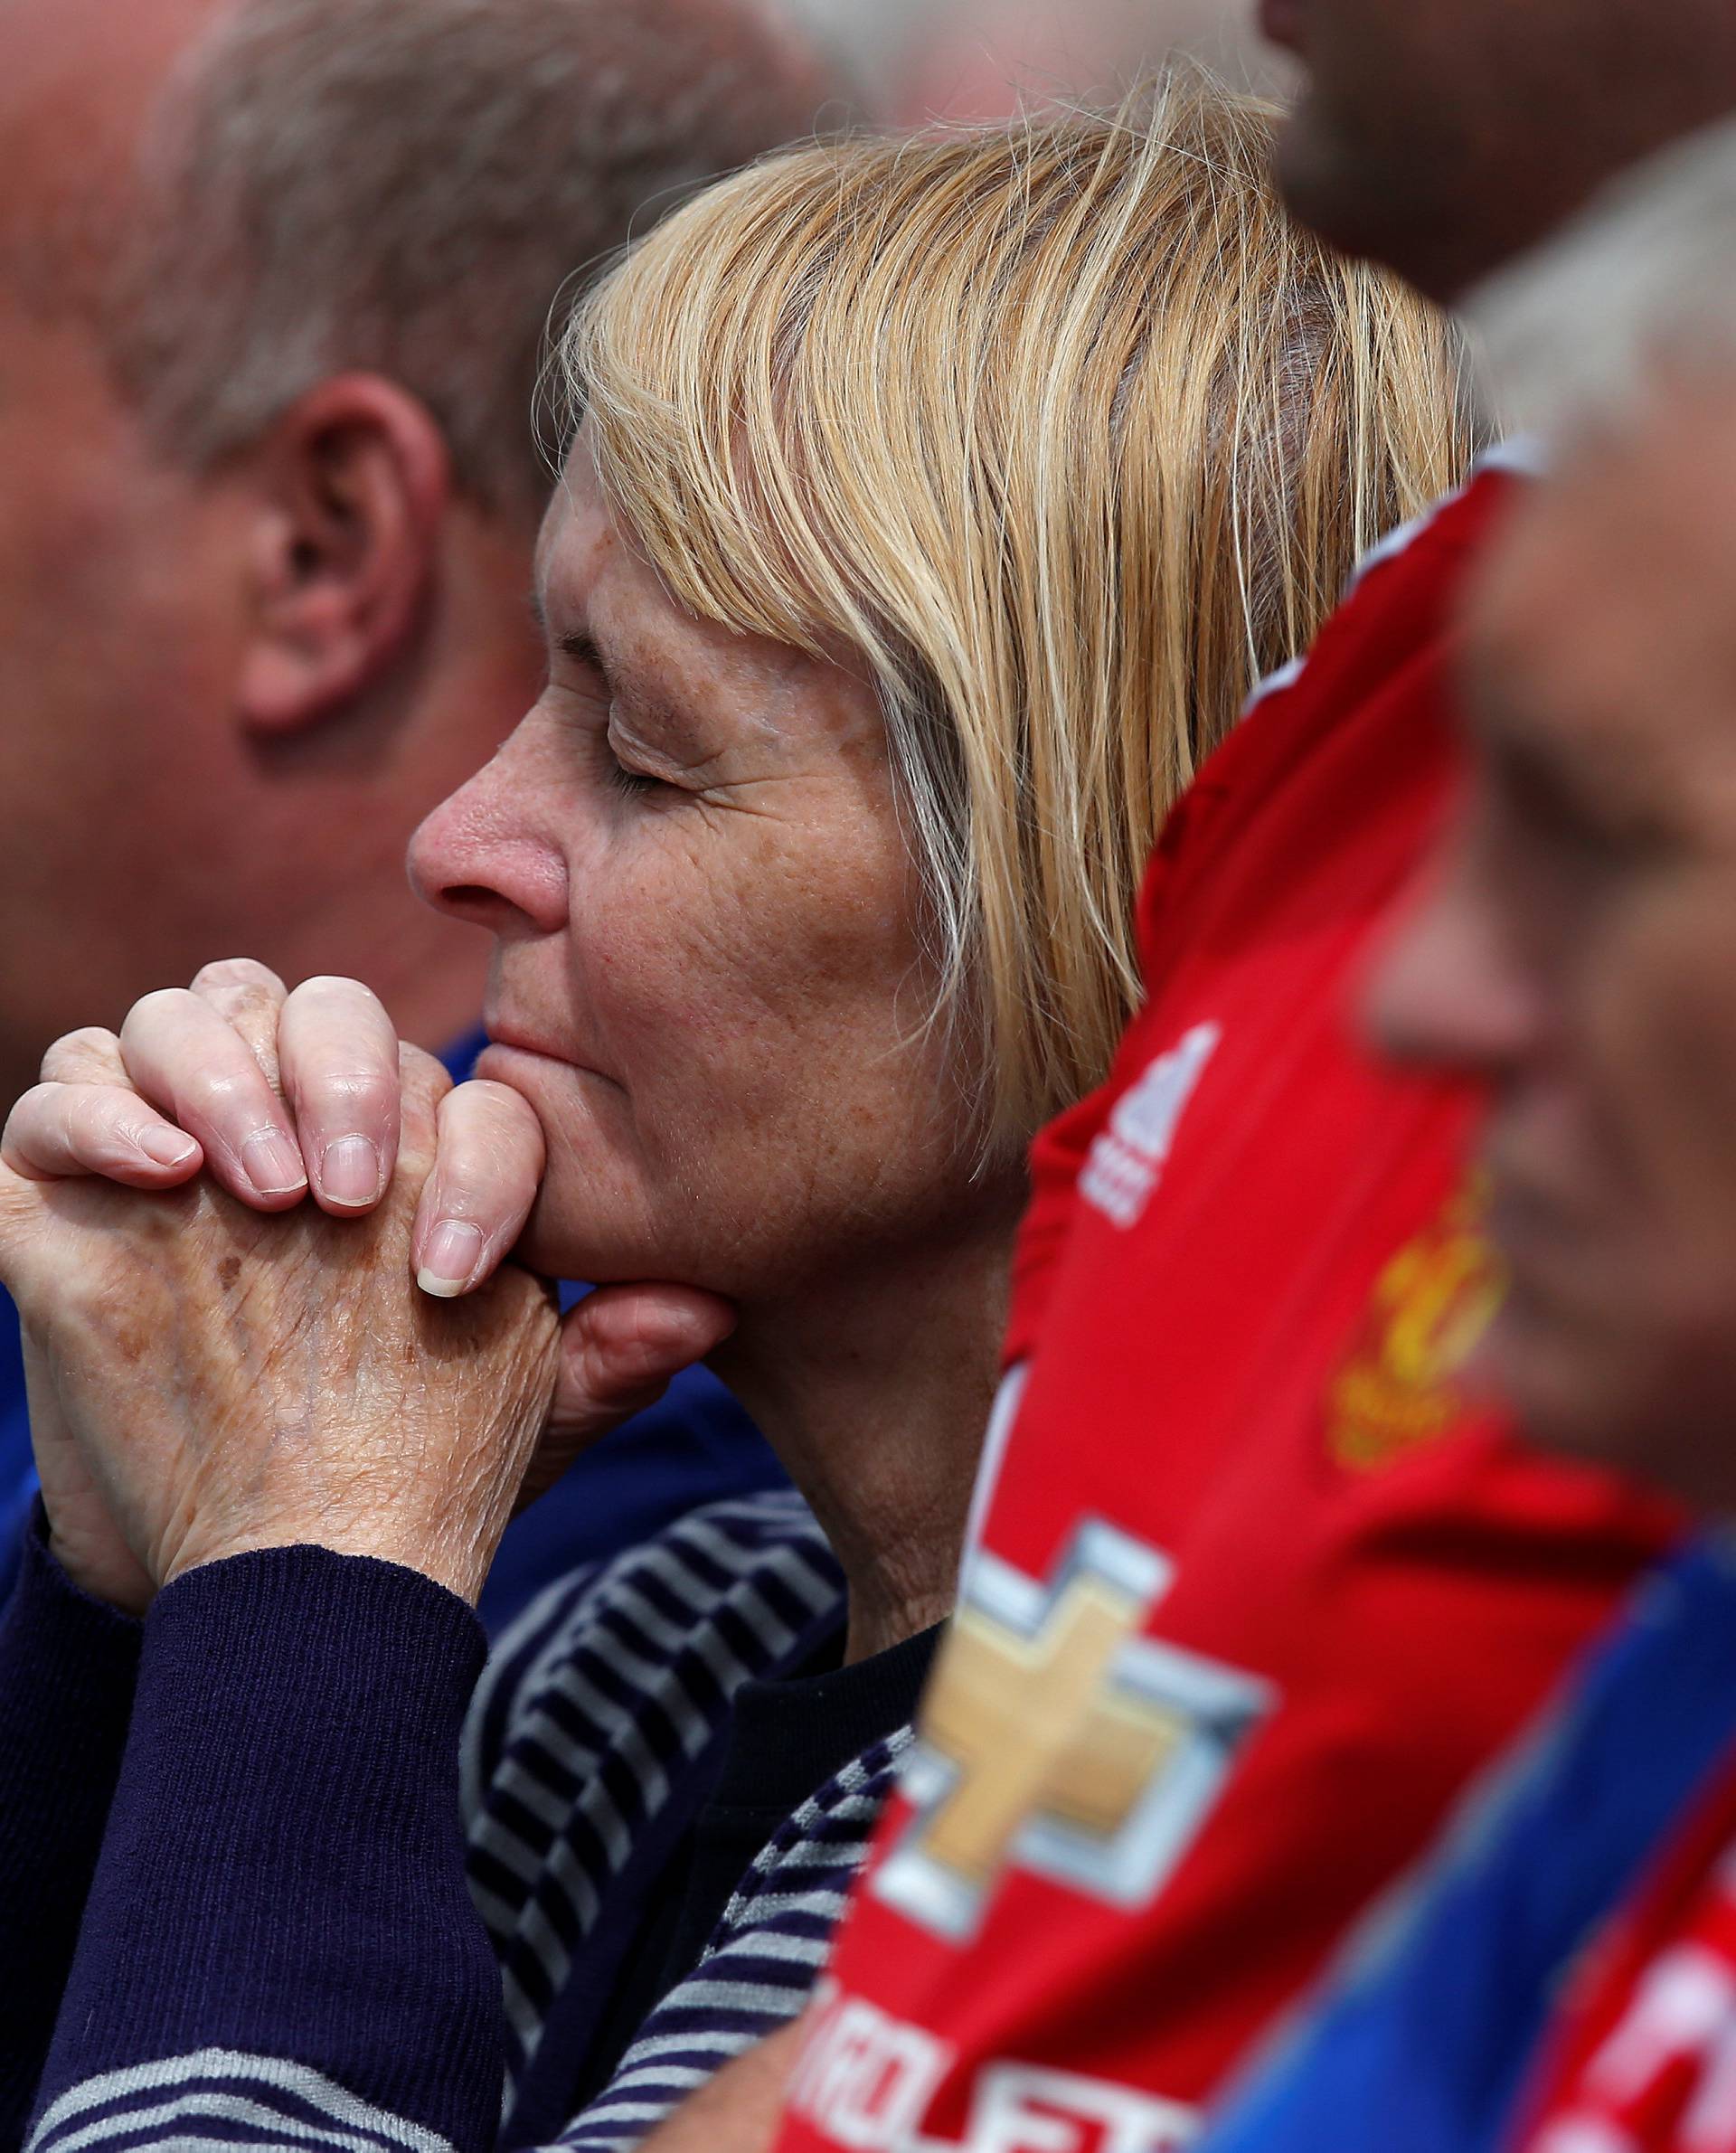 A woman reacts as football fans and wellwishers gather ahead of the funeral of Bradley Lowery